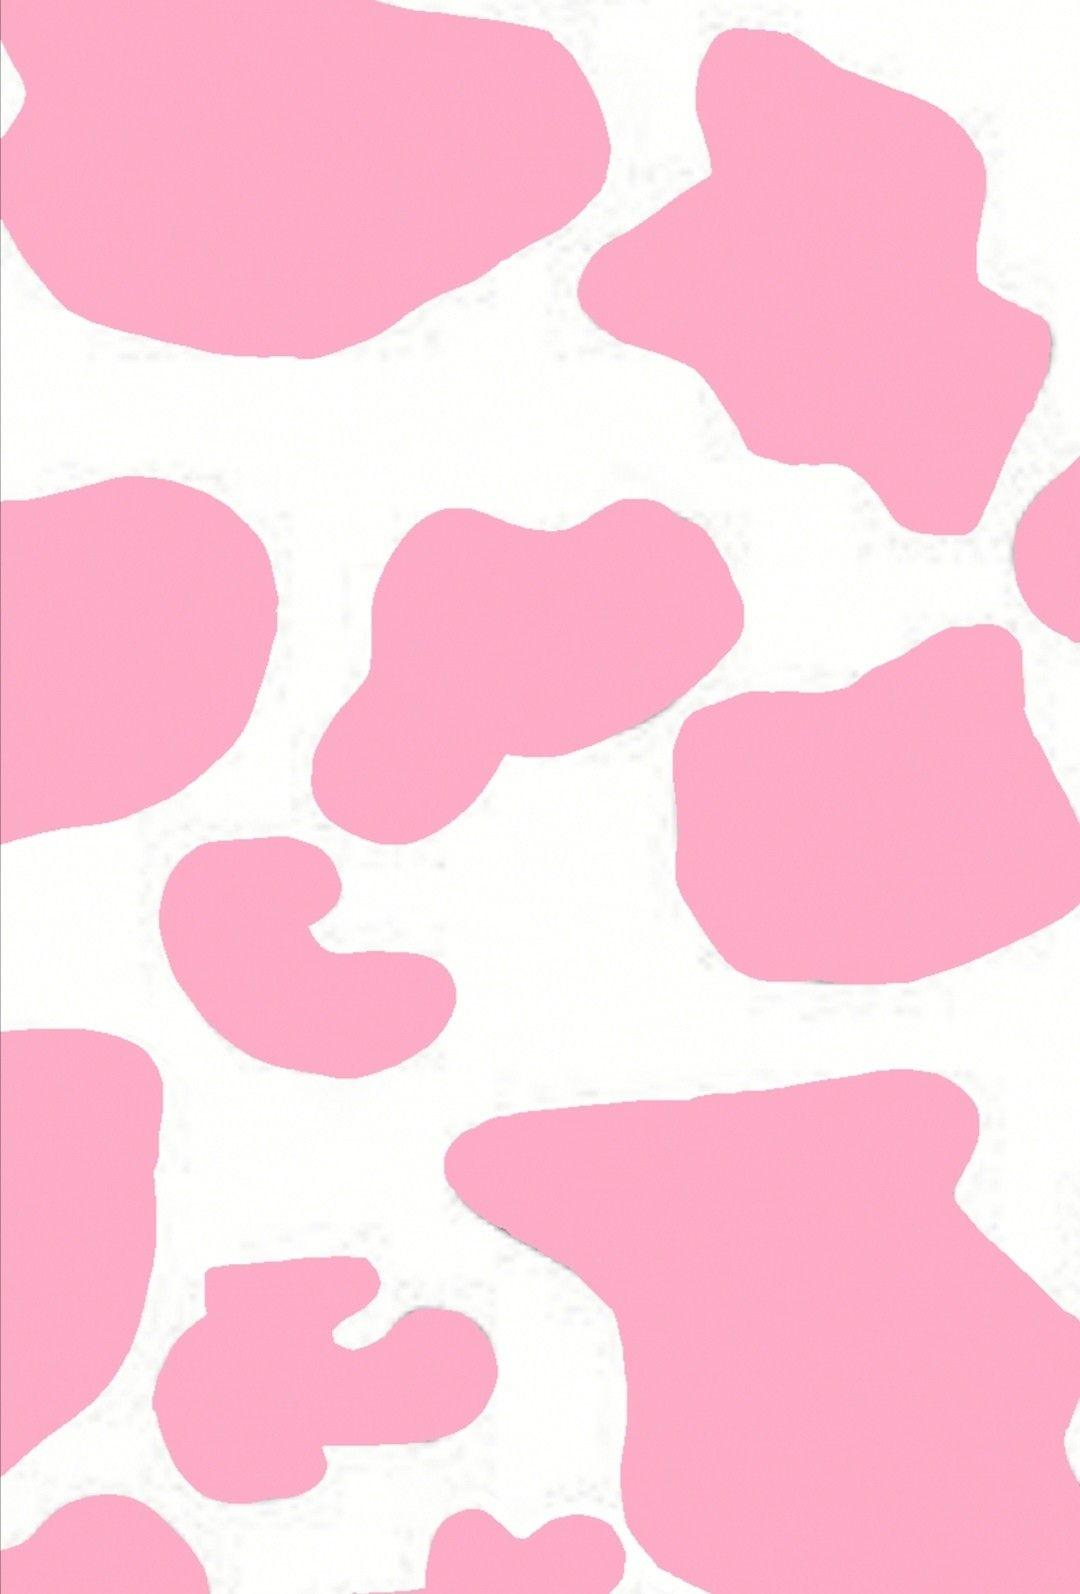 Aesthetic High Resolution Pink Cow Print Wallpaper - bmp-central